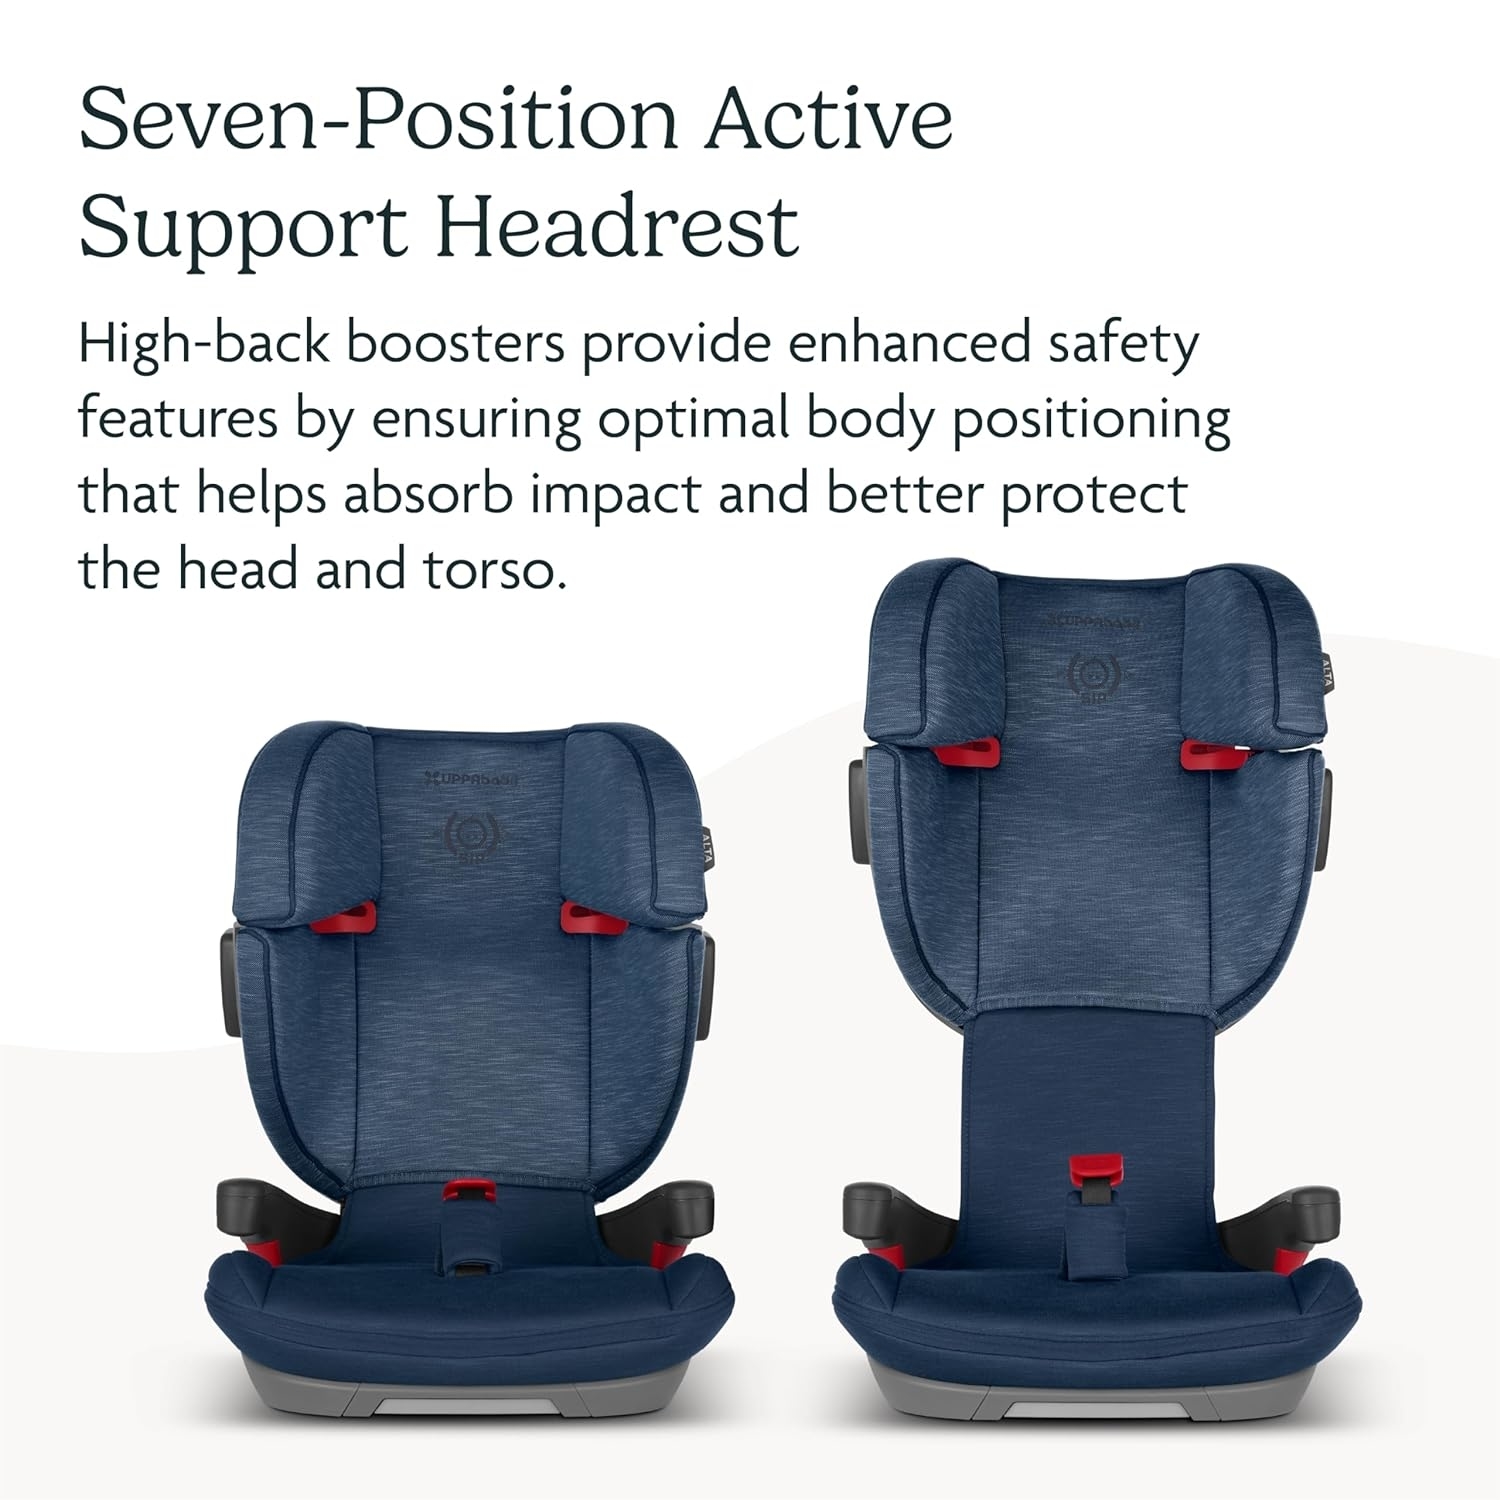 Child safety car seat with seven-position headrest feature